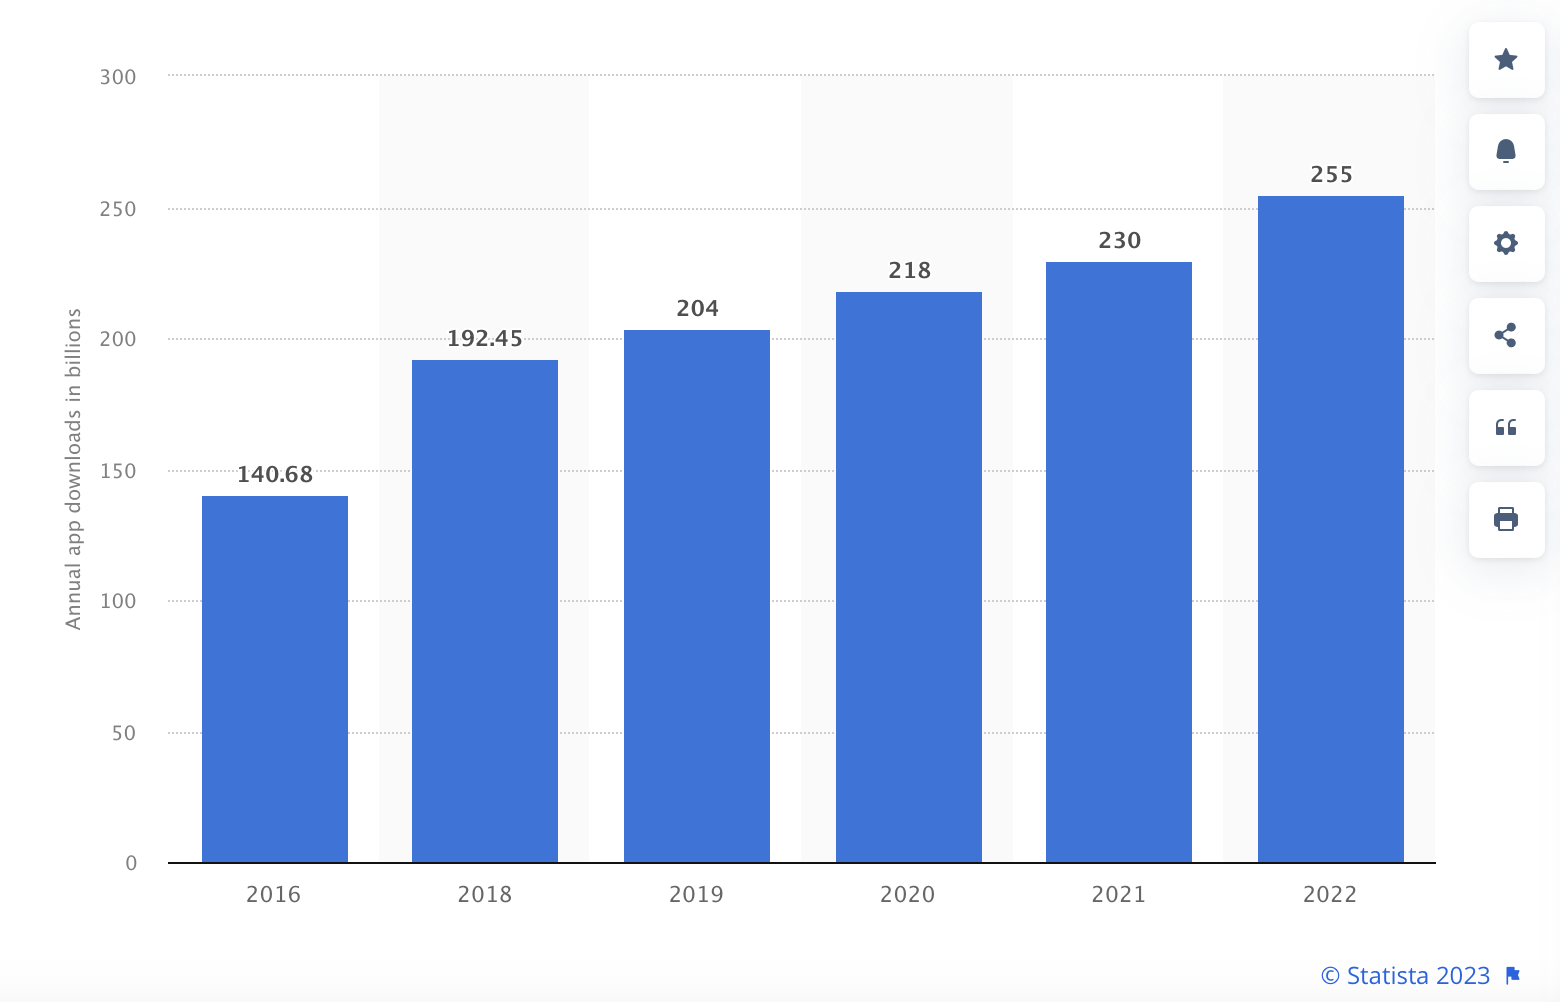 Chart of Statista's Mobile Downloads 2022